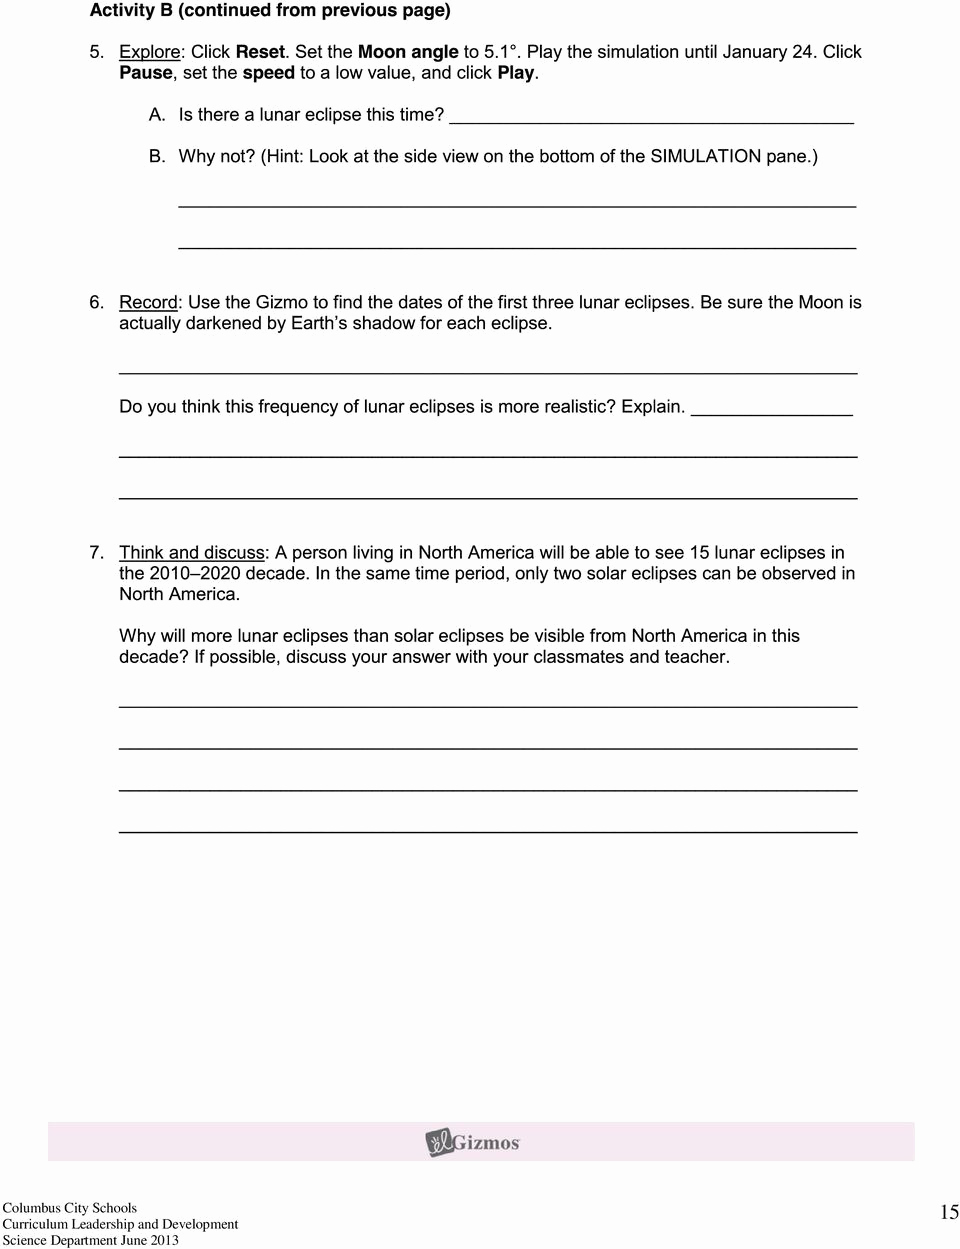 Eclipse Worksheets for Middle School New 20 solar Eclipse Worksheets Middle School